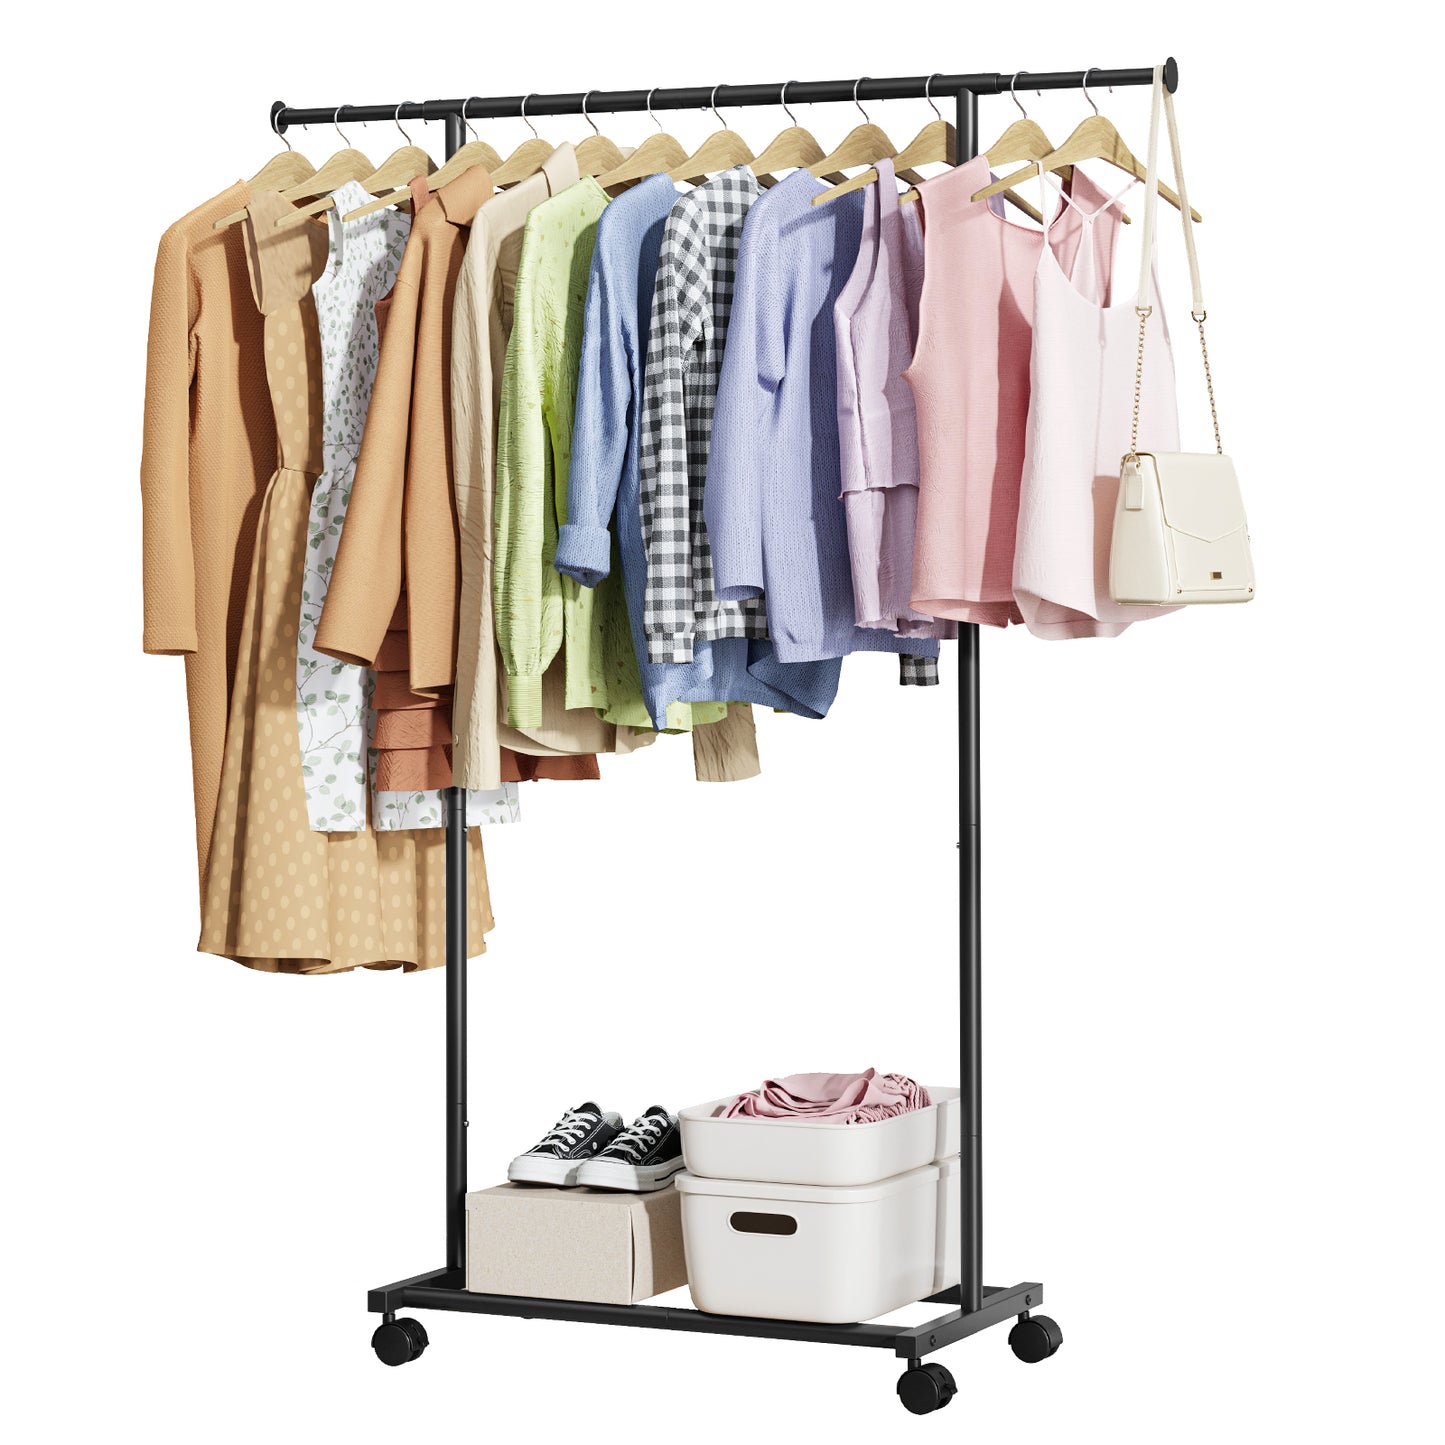 Kitsure Clothes Rack, Adjustable Clothing Racks for Hanging Clothes, Rolling Garment Rack with Shelf, Sturdy Closet Rack, Clothes Hanger Rack for Pants, Dresses （431）